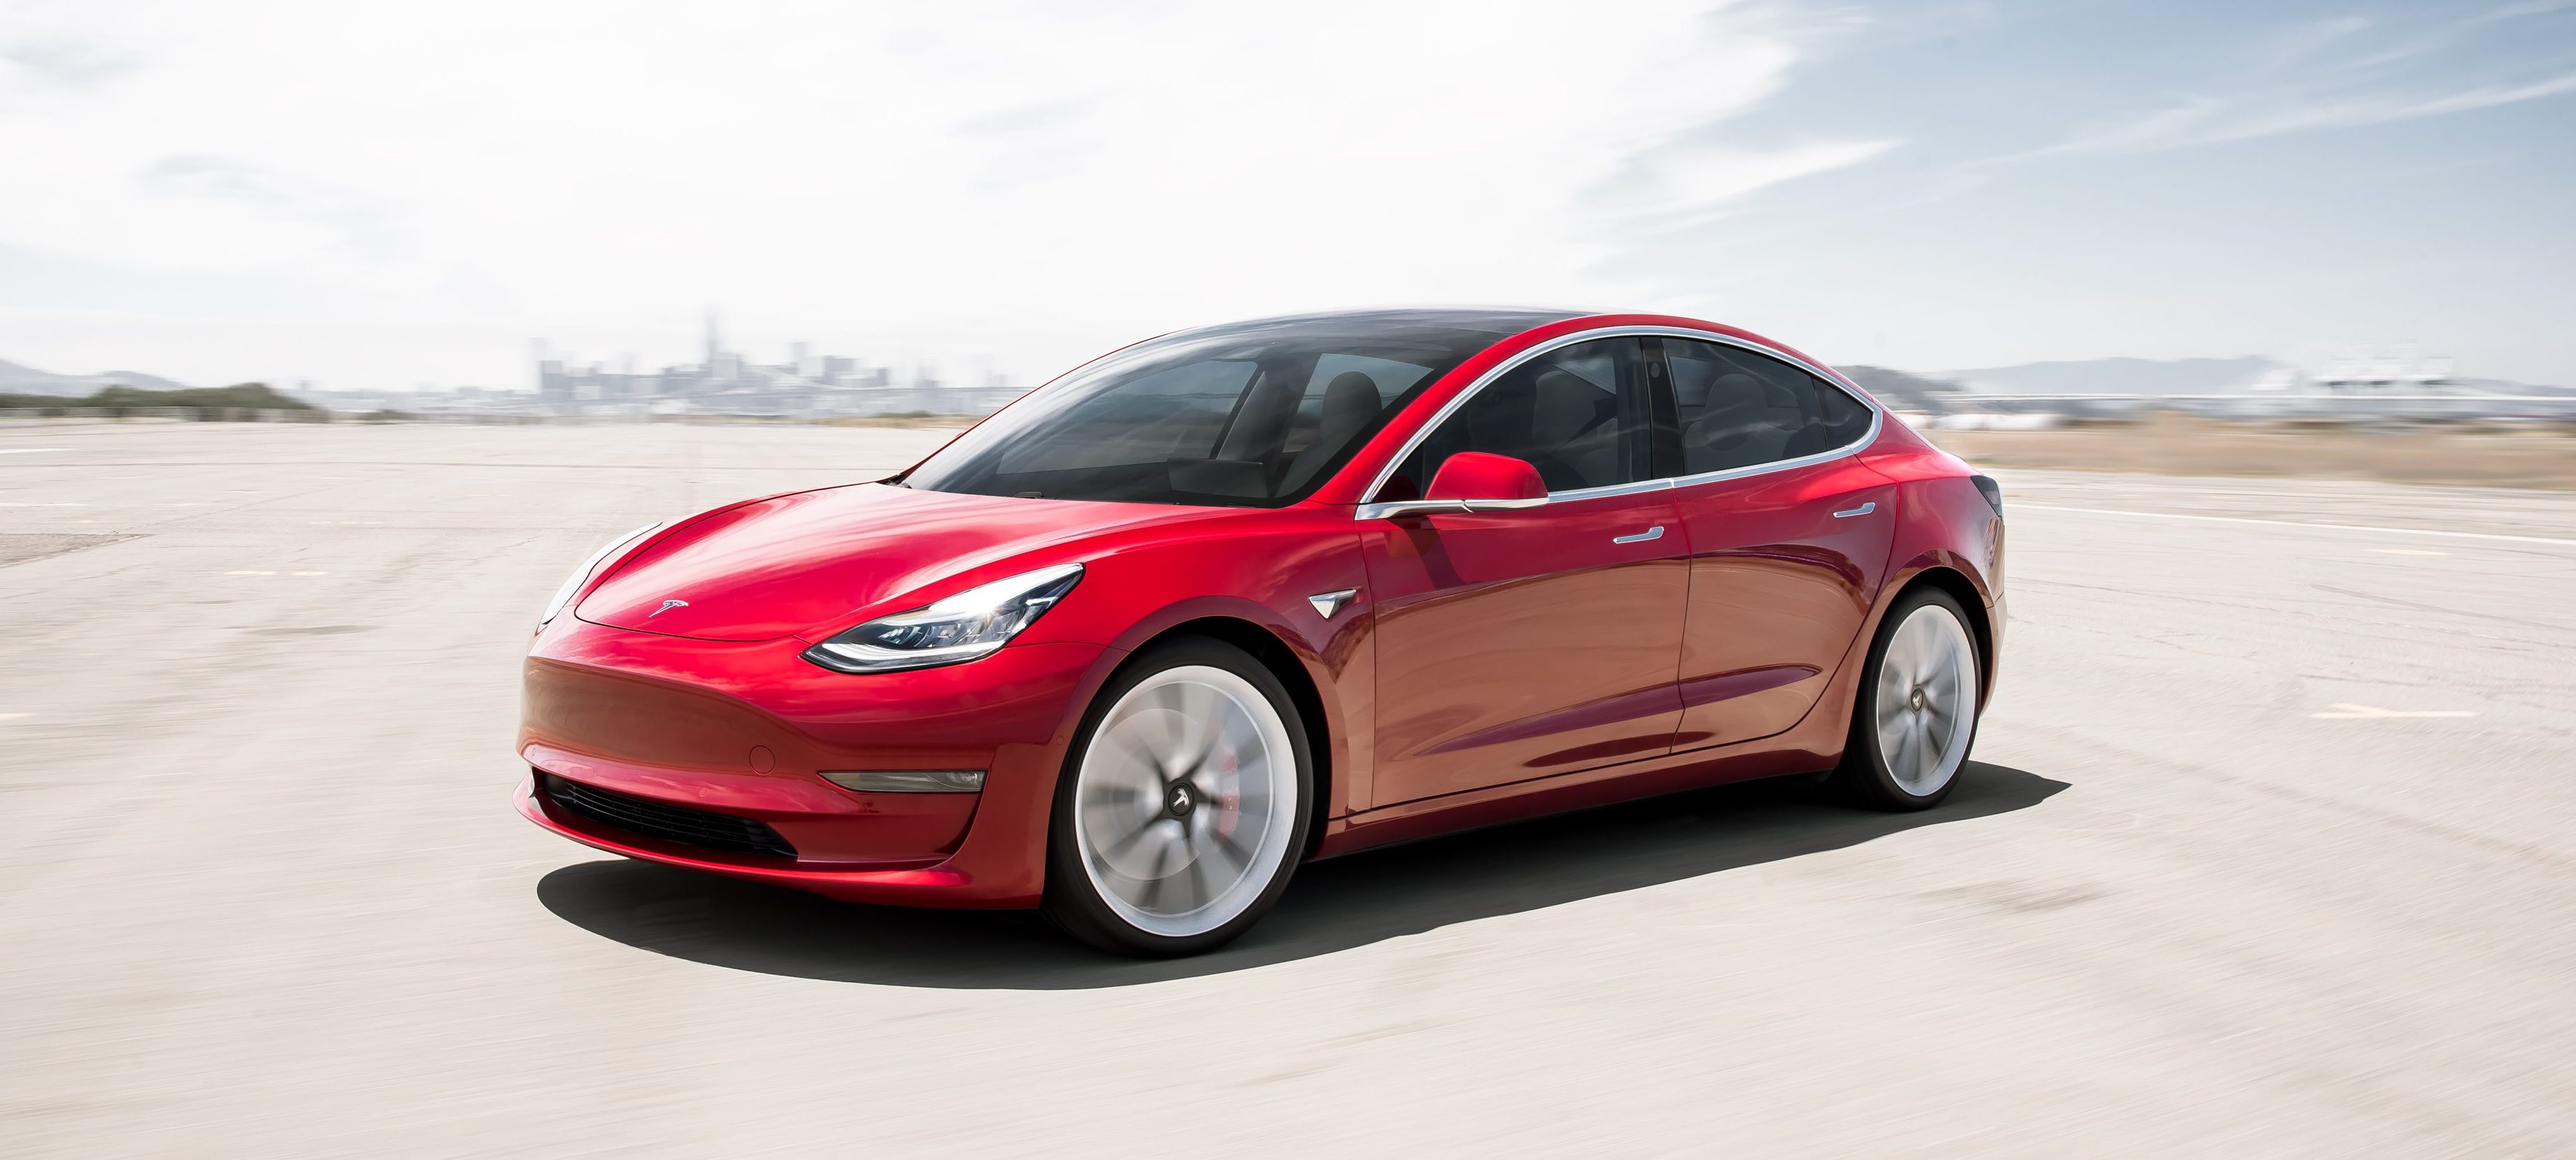 hoop behuizing bout Tesla Model 3 0-60mph times, then and now, all trims compared | Electrek